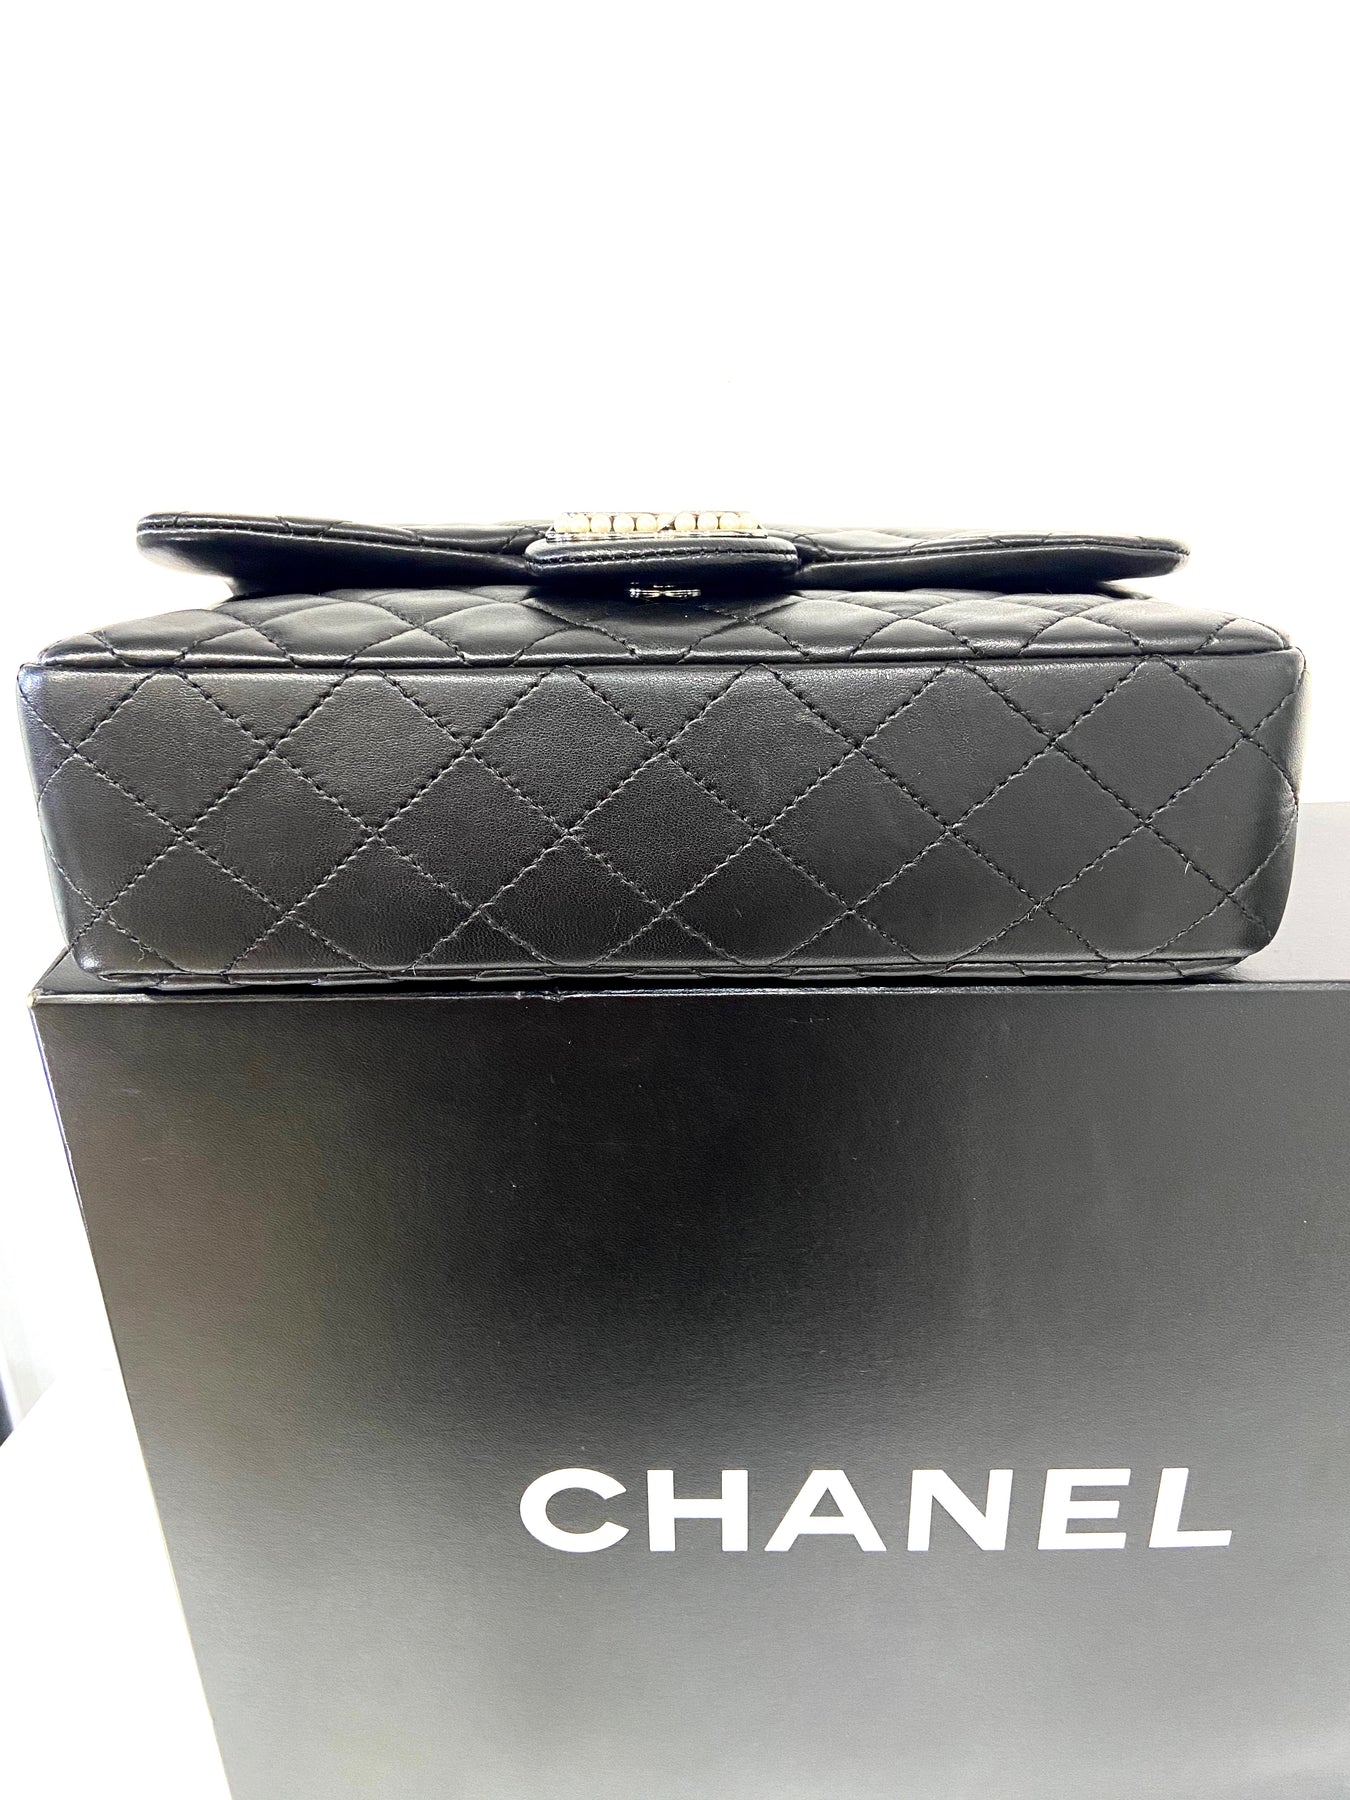 CHANEL CC WESTMINSTER PEARL FLAP LAMBSKIN BAG